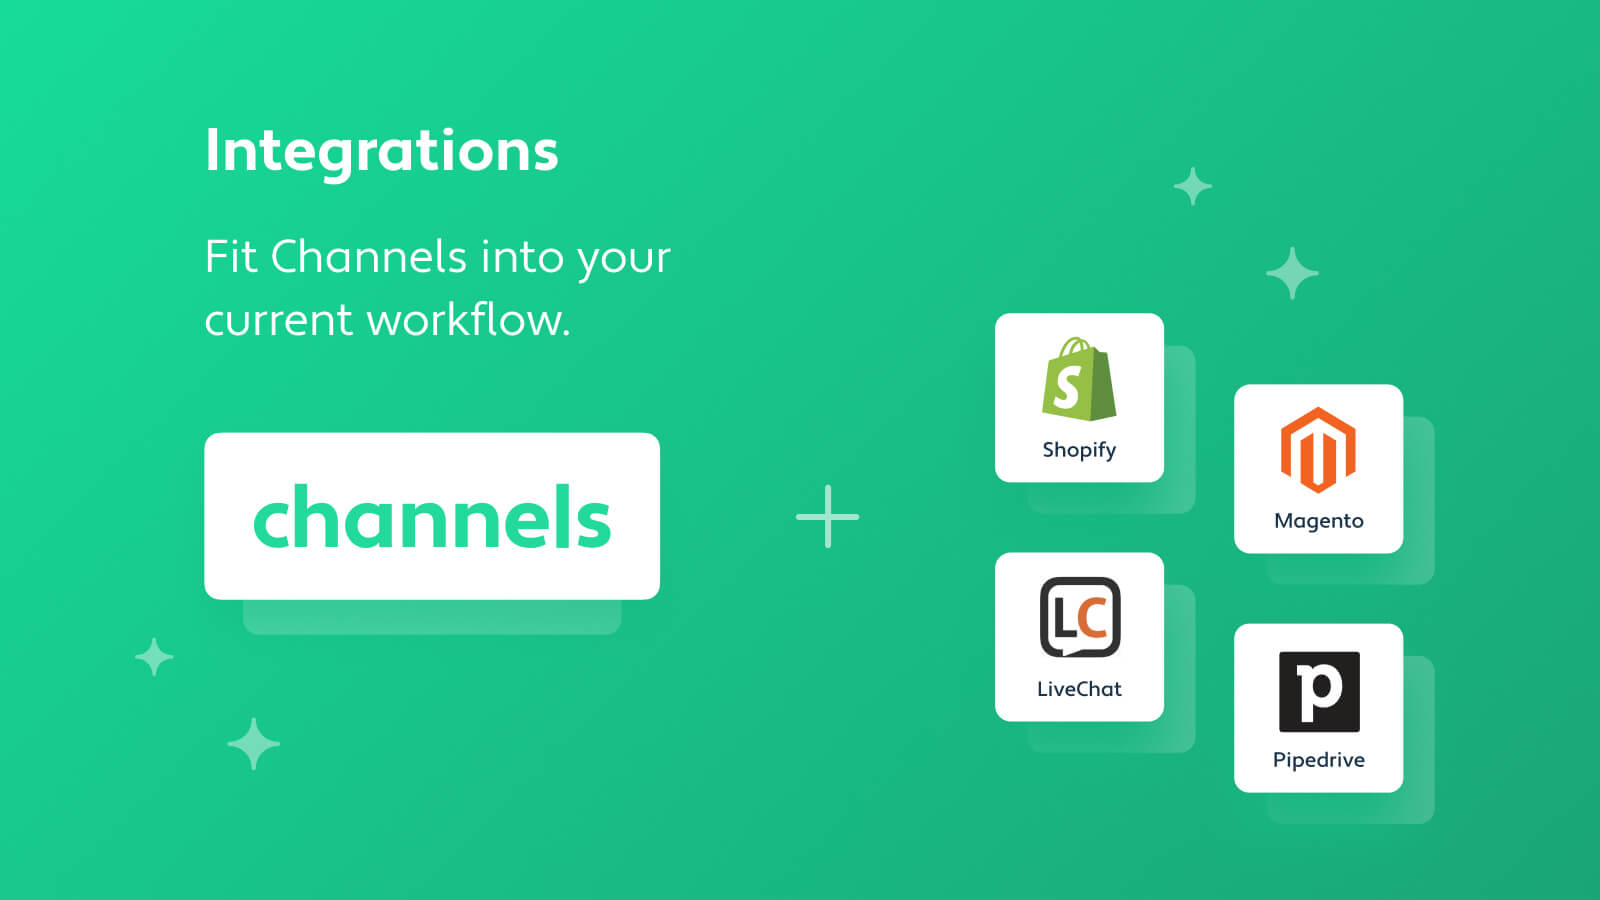 MagicJack Alternative: Integrate Channels with various tools and fit it into your workflow